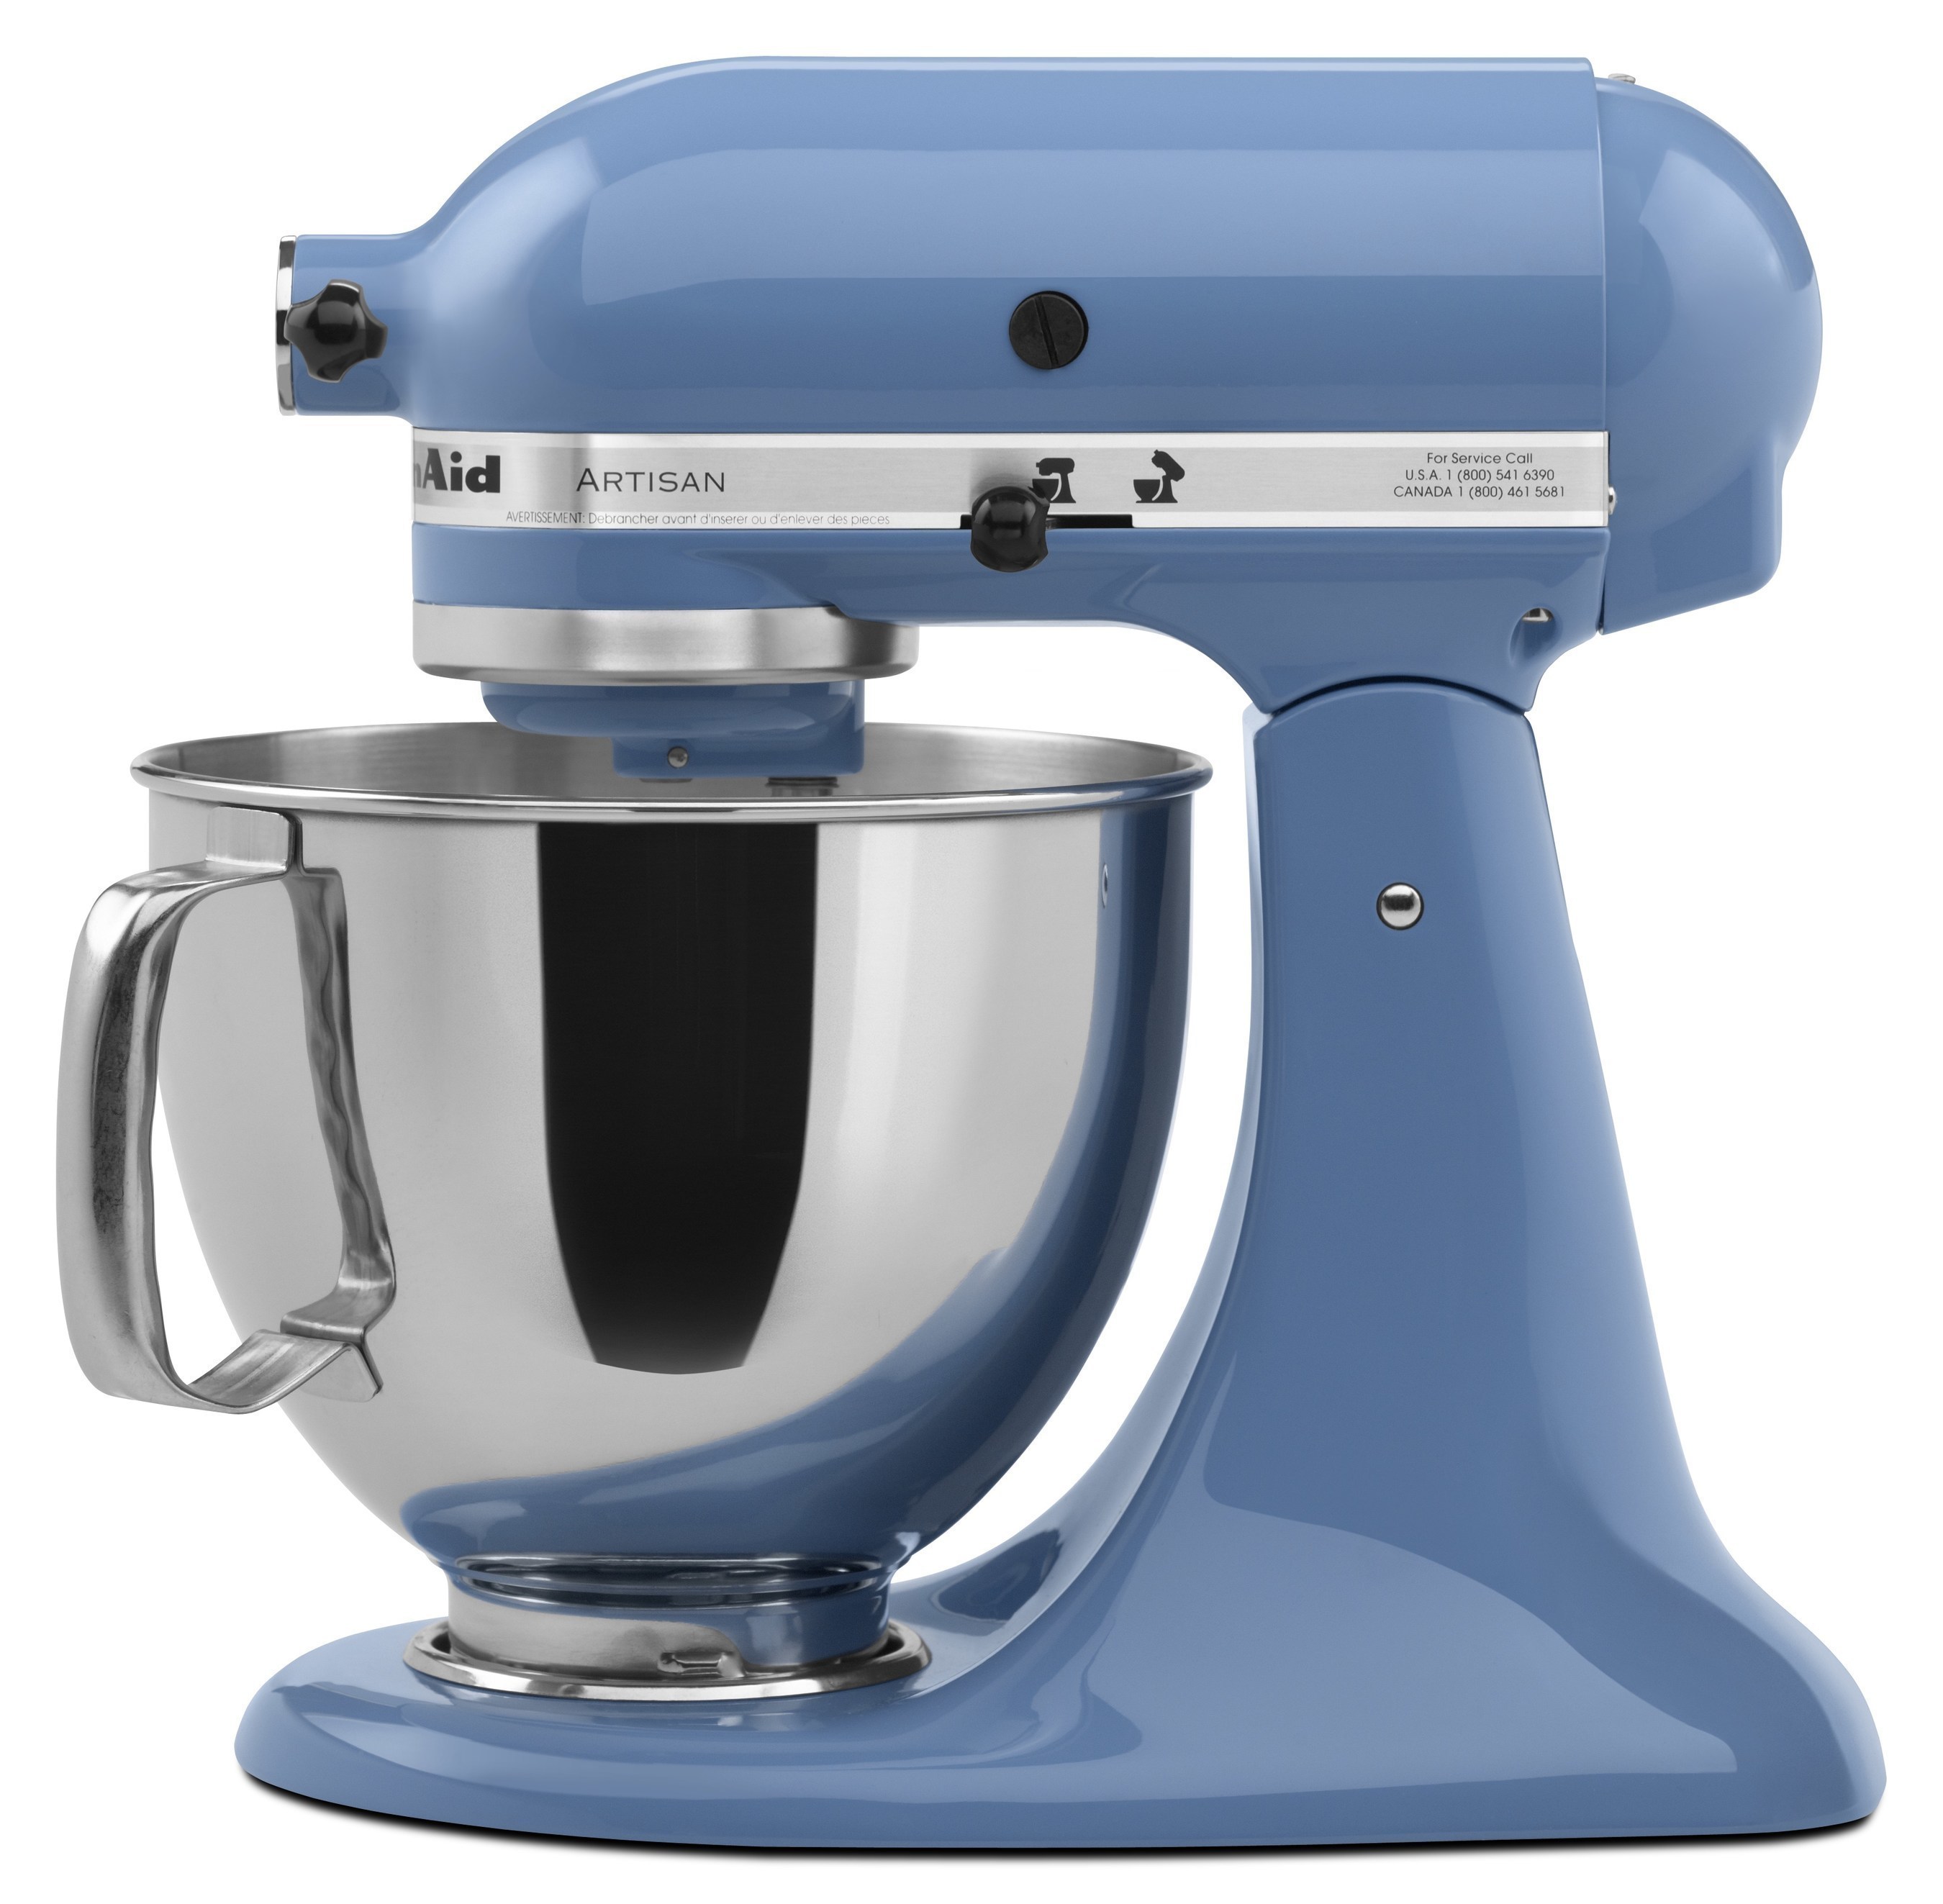 KitchenAid delivers its newest shade to countertops - Home Furnishings News